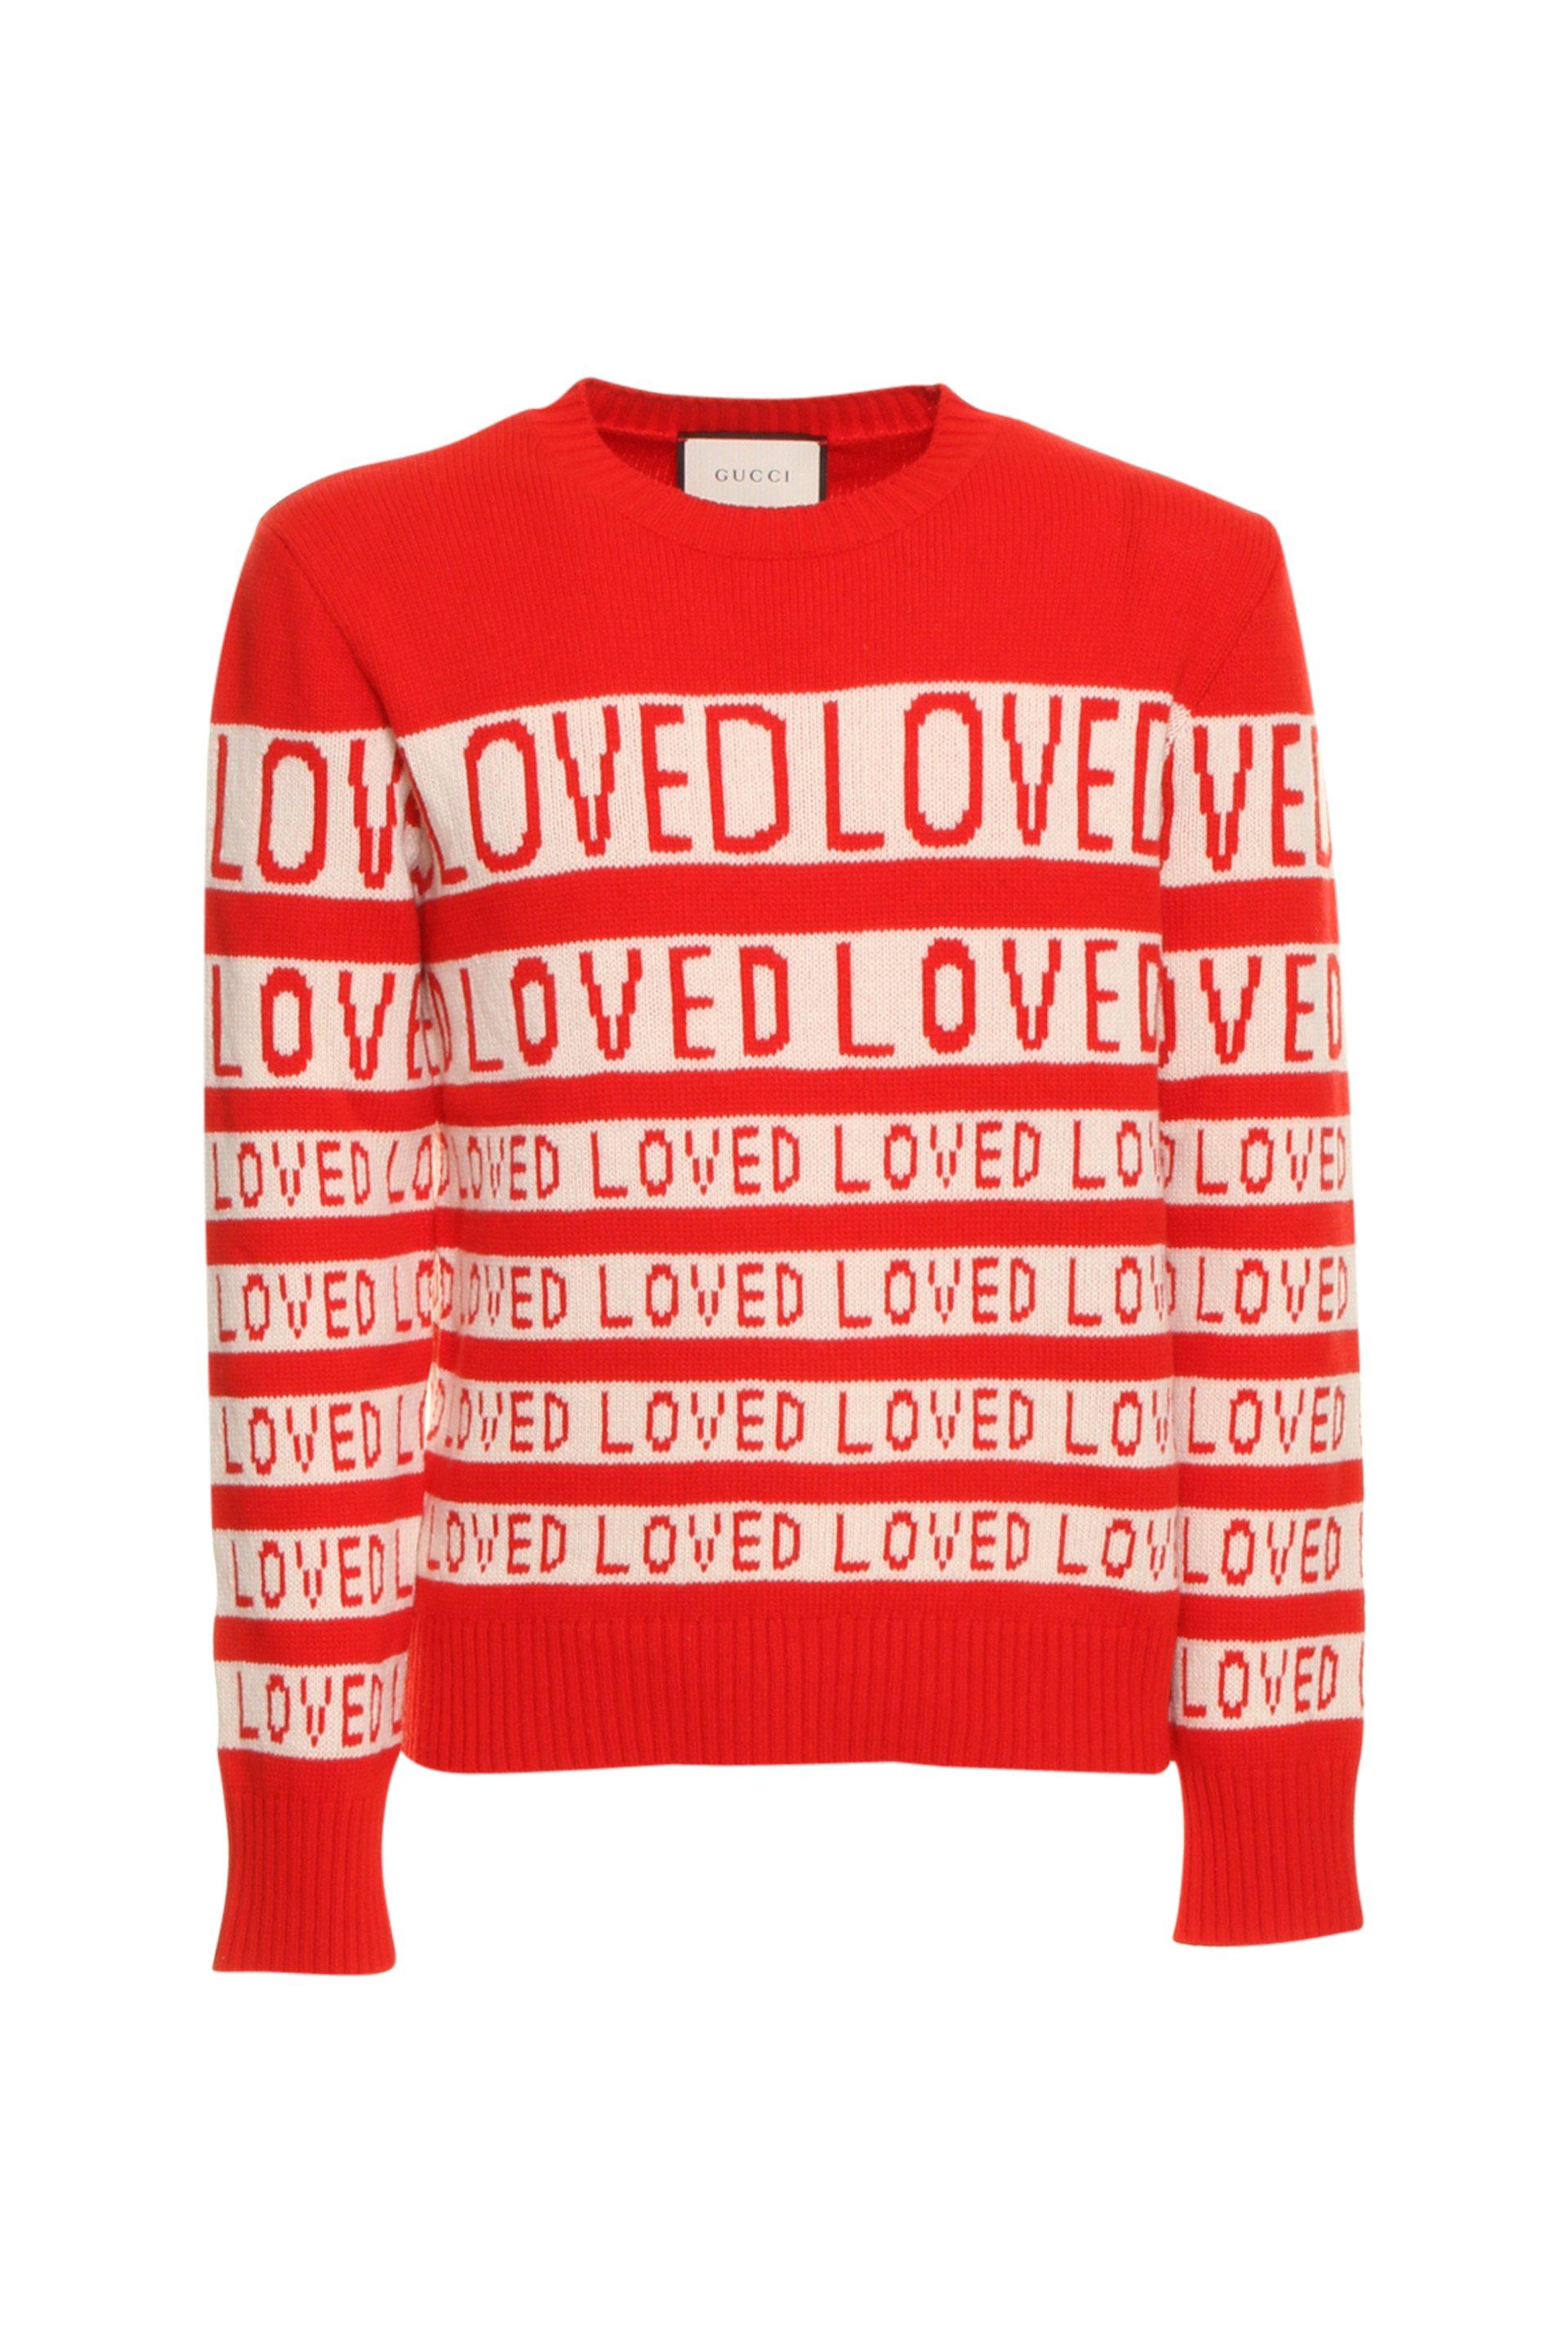 Gucci Wool Red & White 'loved' Sweater for Men - Lyst